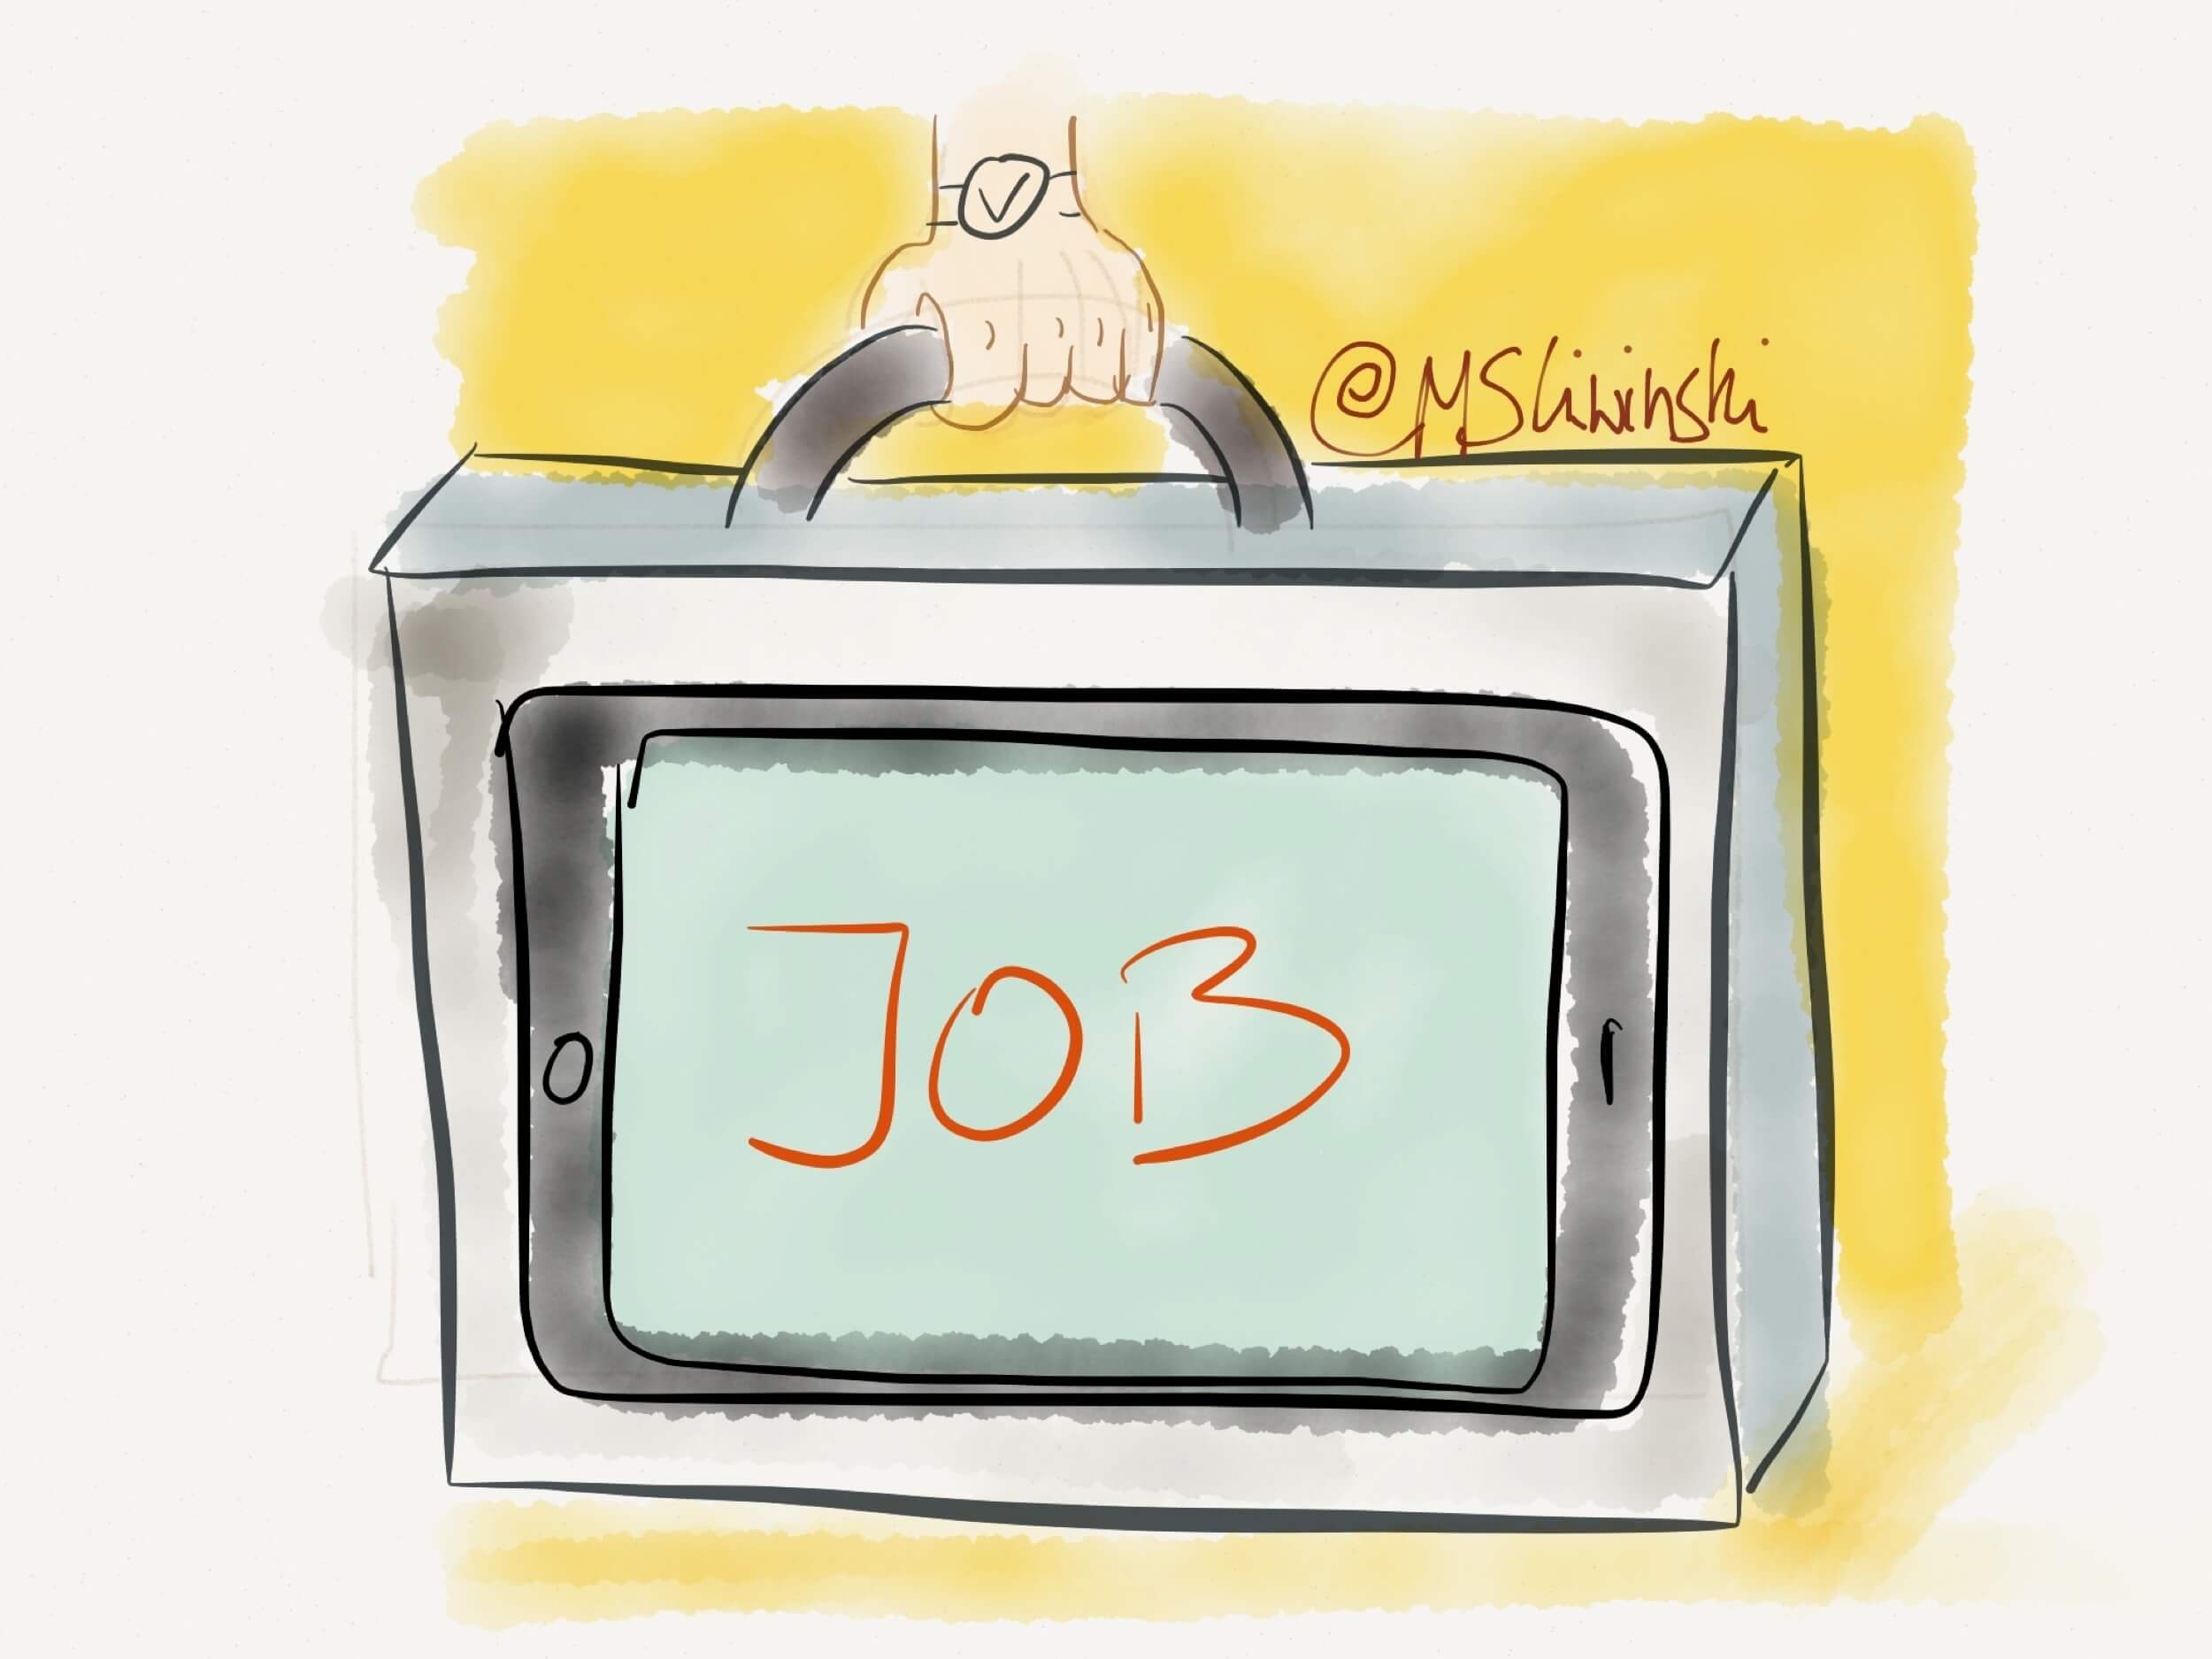 Who can do their day job effectively on the iPad?